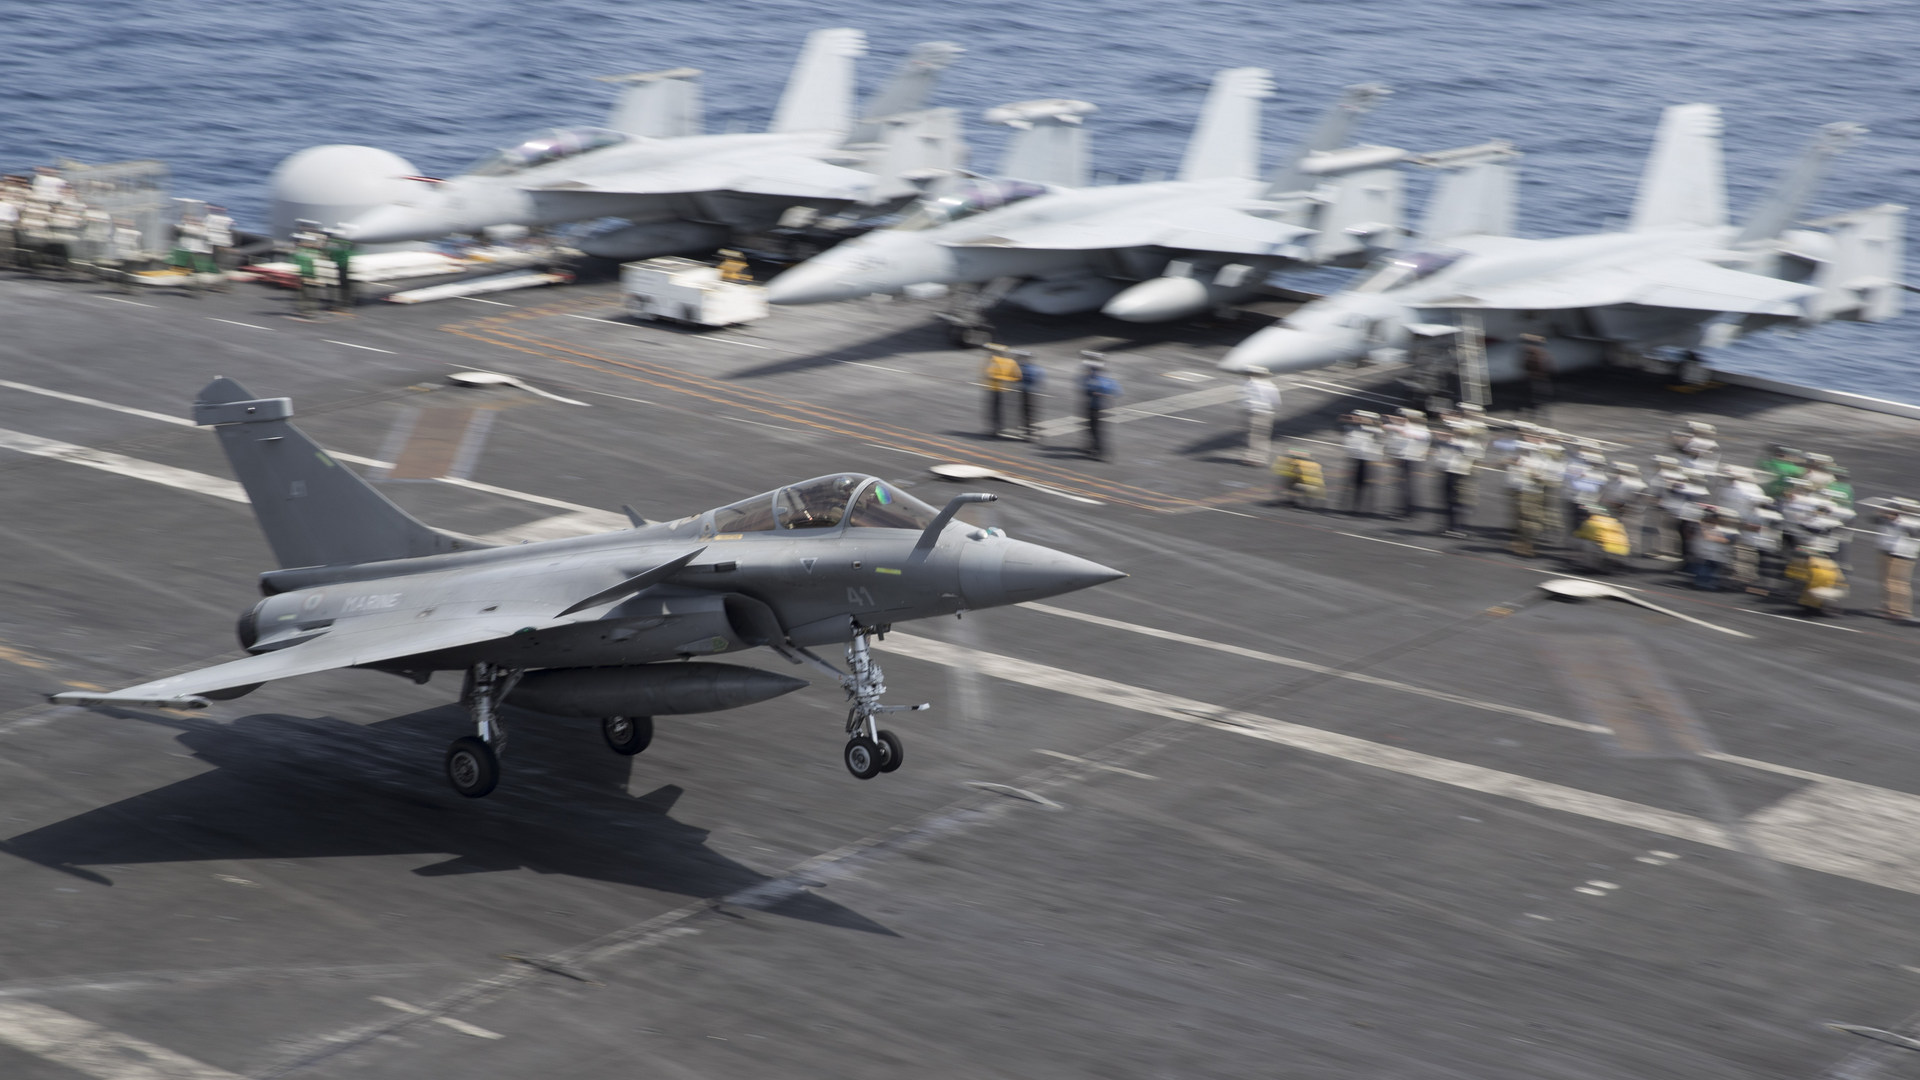 Atlantic Ocean : A French Dassault Rafale M Fighter prepares to land on the flight deck of the Nimitz-class aircraft carrier USS Harry S. Truman (CVN 75). Harry S. Truman is deployed as part of an ongoing rotation of U.S. forces supporting maritime security operations in international waters around the globe -- U.S. Navy photo by MCS Specialist 3rd Class Gitte Schirrmacher. -